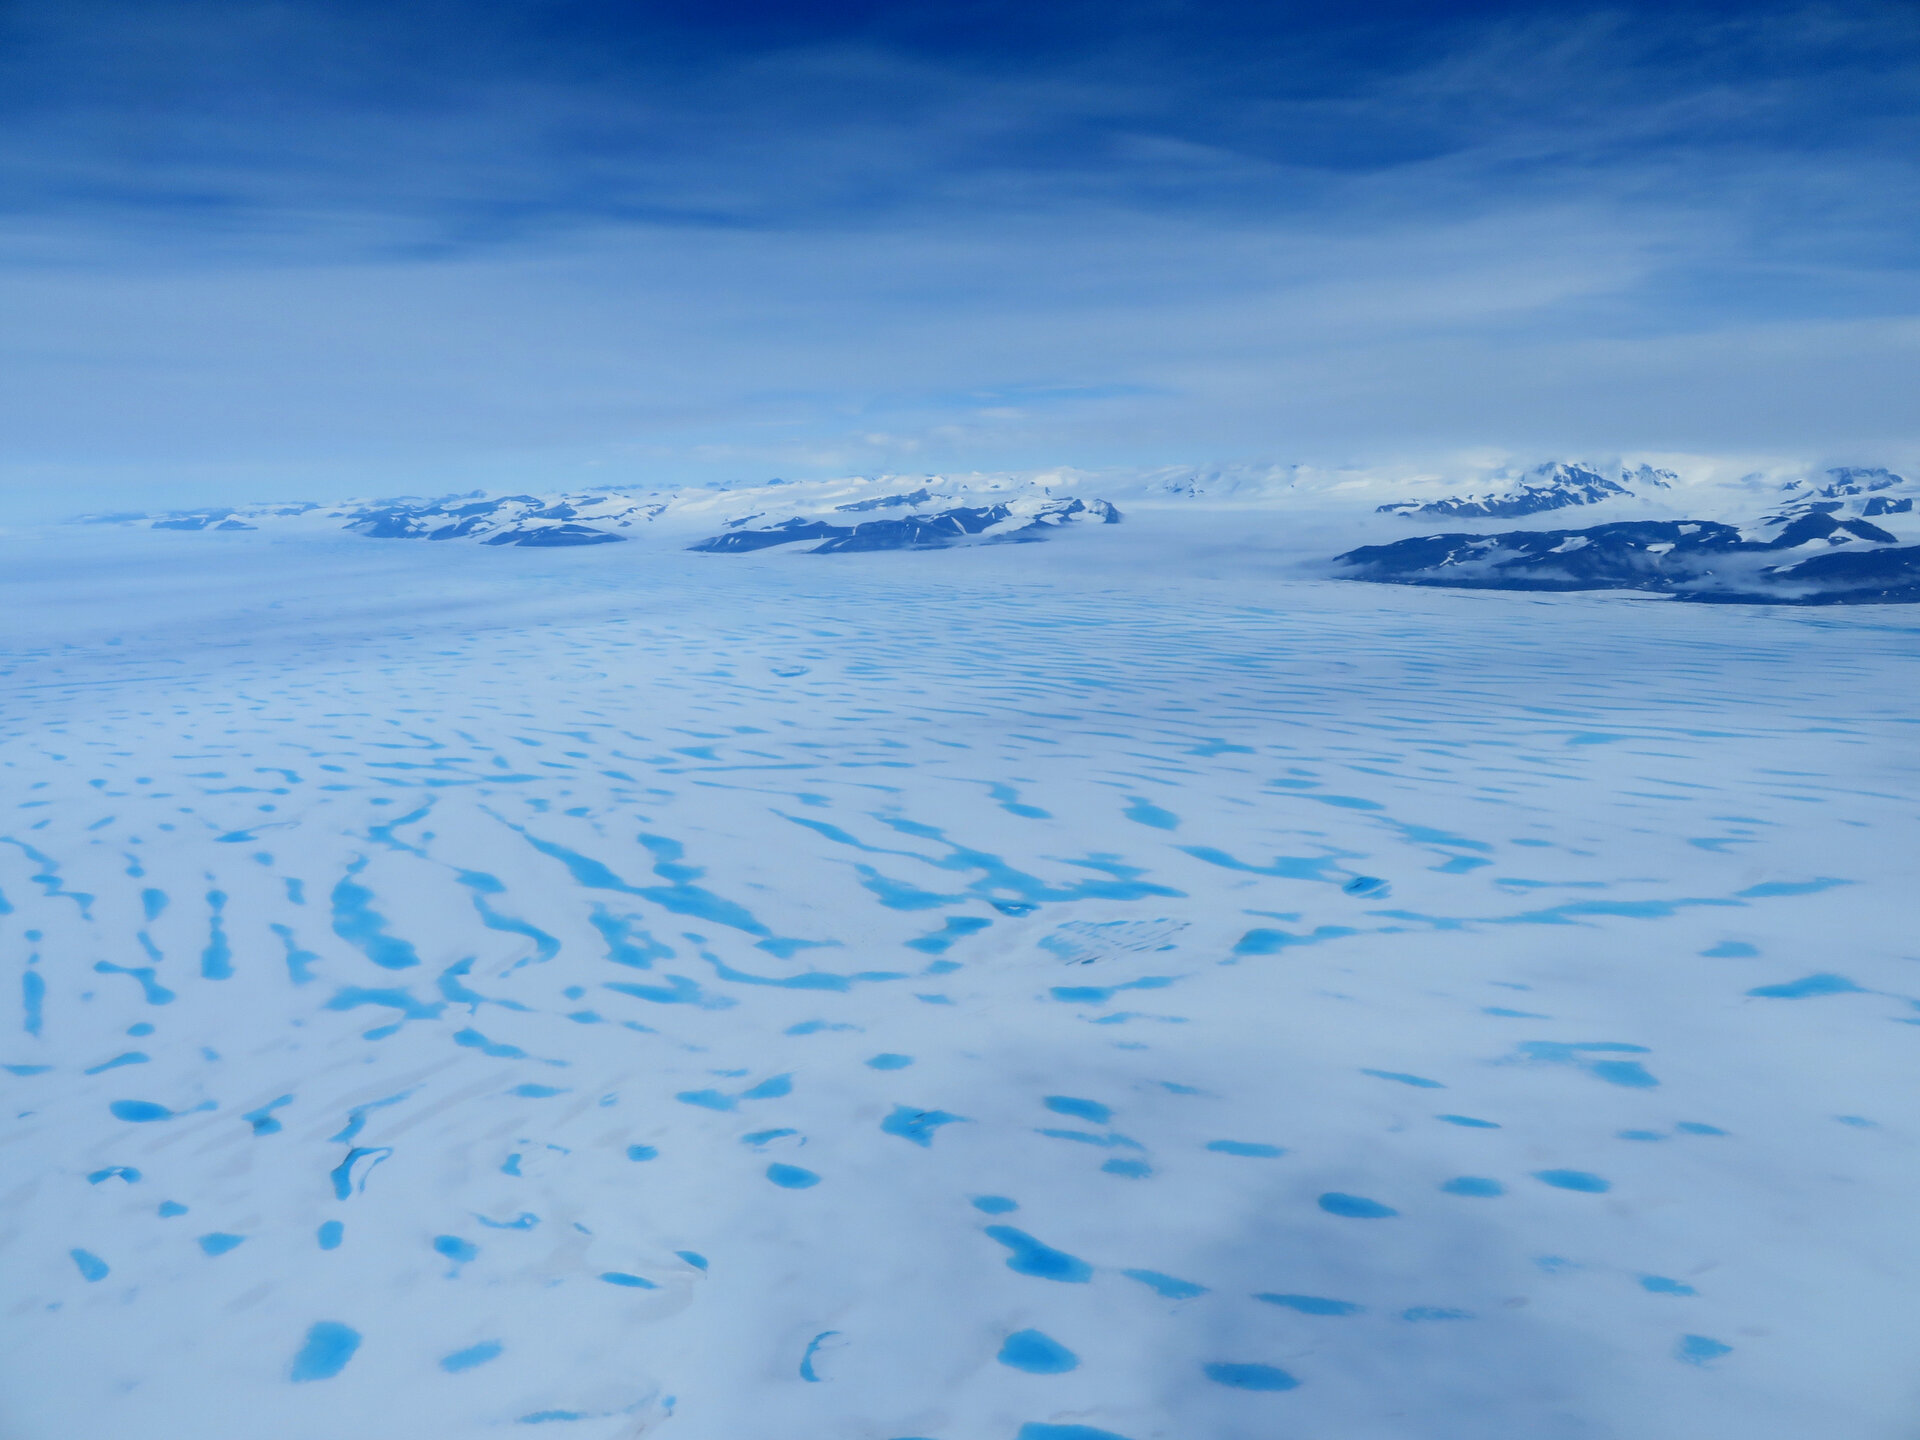 George VI Ice Shelf from the air